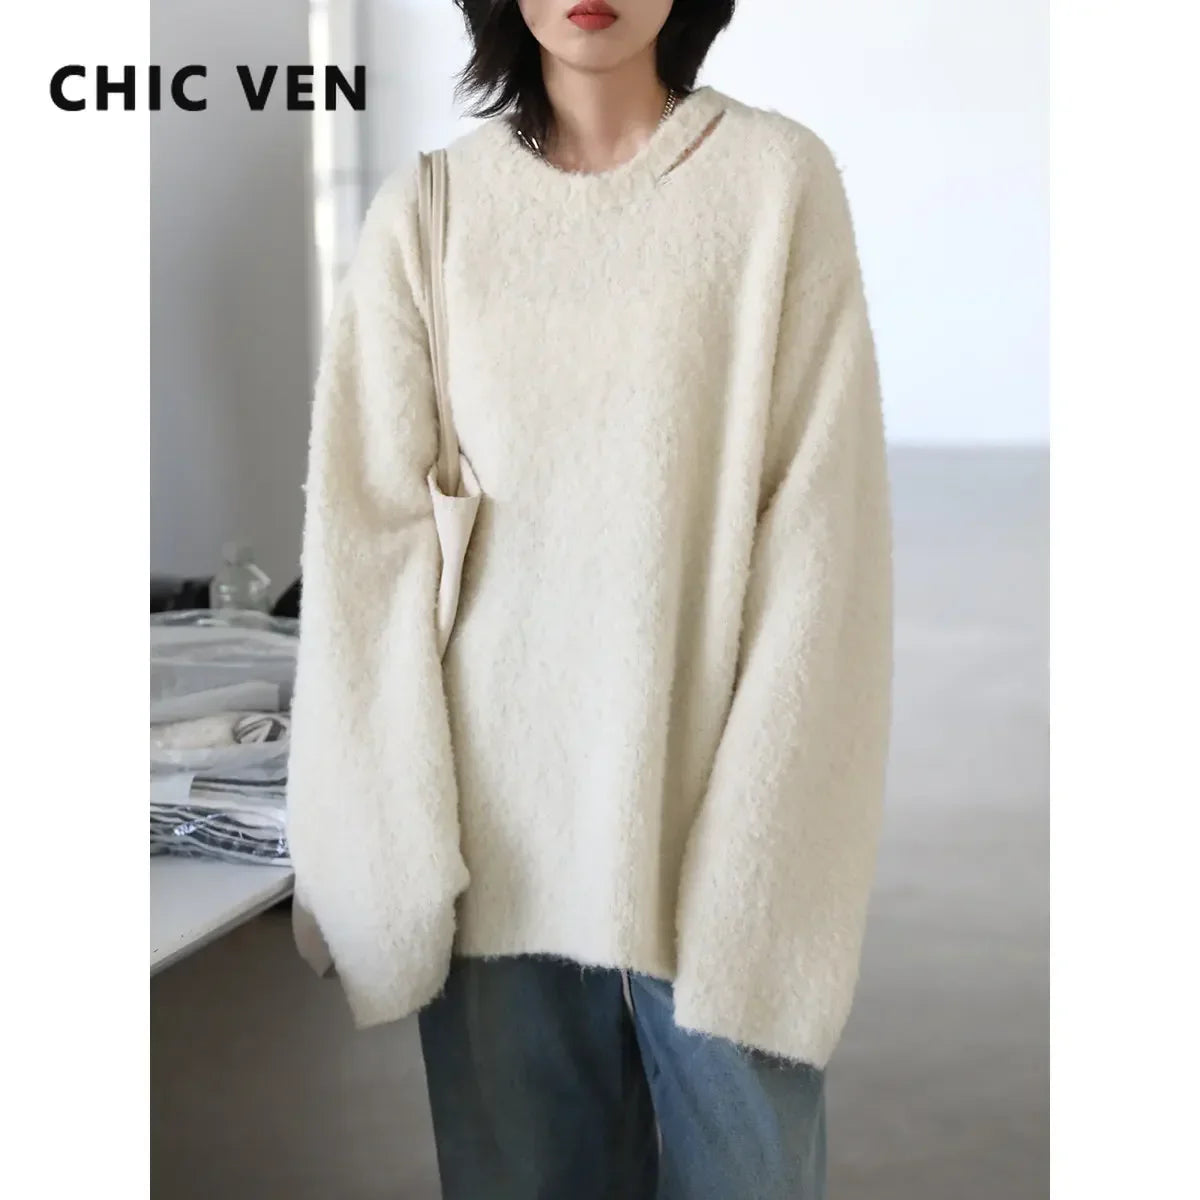 Women's Sweaters Casual Neckline Hollow Loose Jumpers Knitwear Soft Warm Female Pullovers Autumn Winter 2023 Fashion